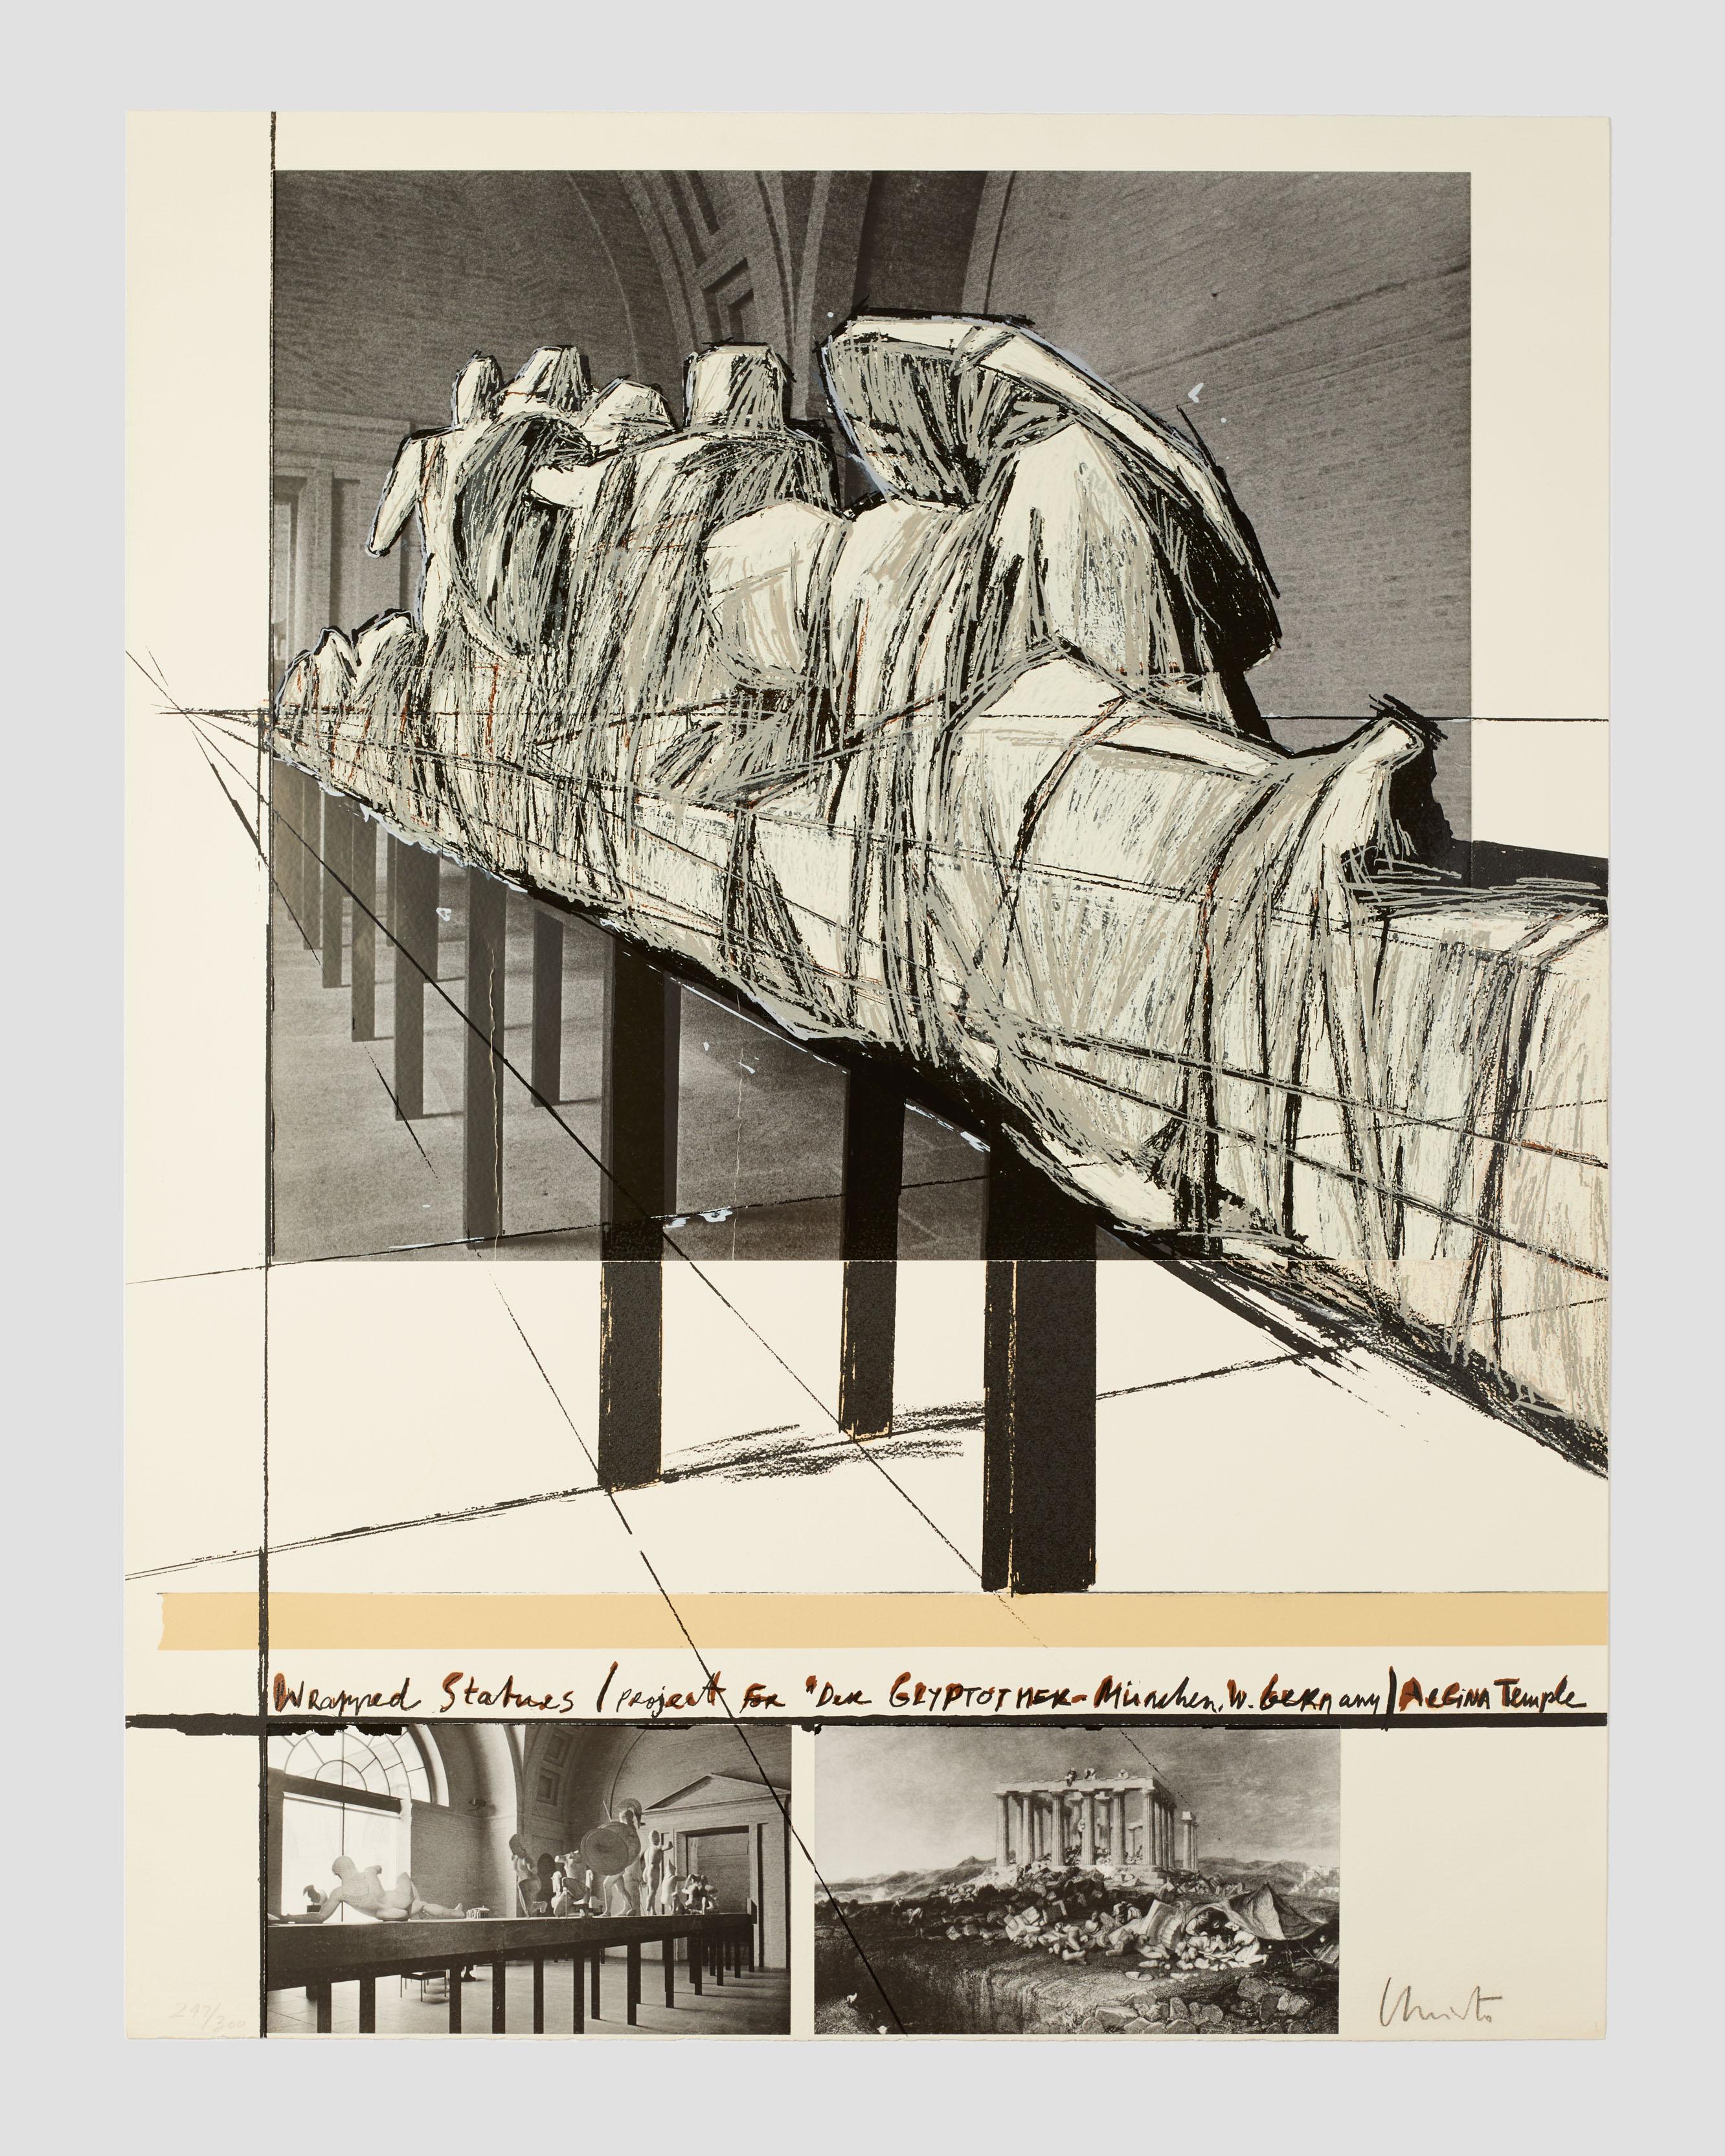 Christo Wrapped Statues, the Glyptothek (Munich) - Print by Christo and Jeanne-Claude